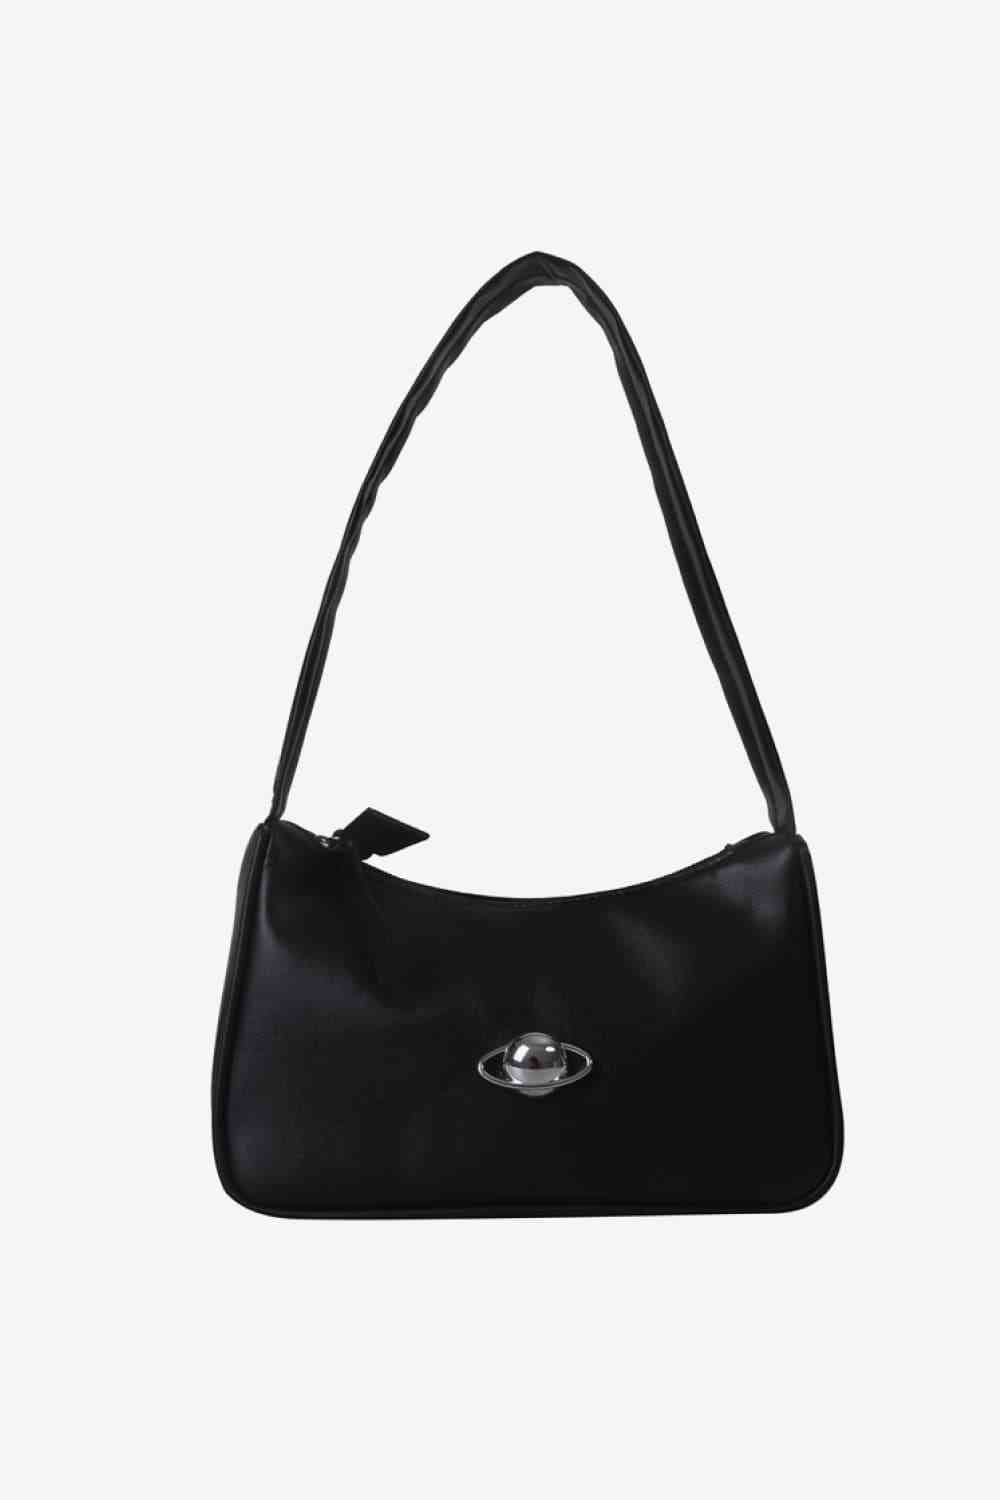 PU Leather Shoulder Bag - Black / One Size - All Products - Handbags - 13 - 2024